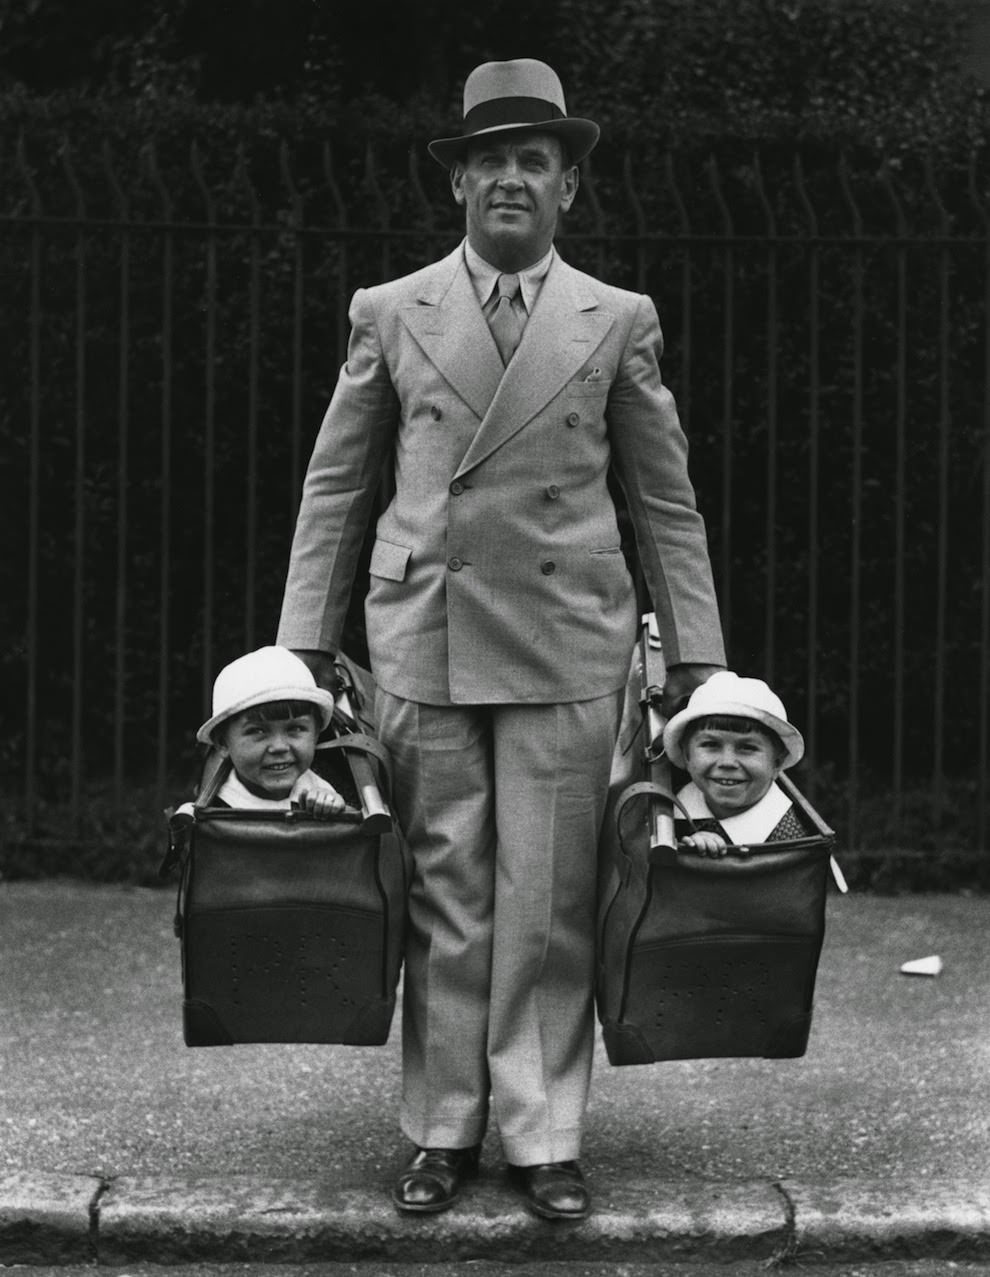 A man carrying twins, two 36-year-olds who are part of a circus act, in his bags, 1935